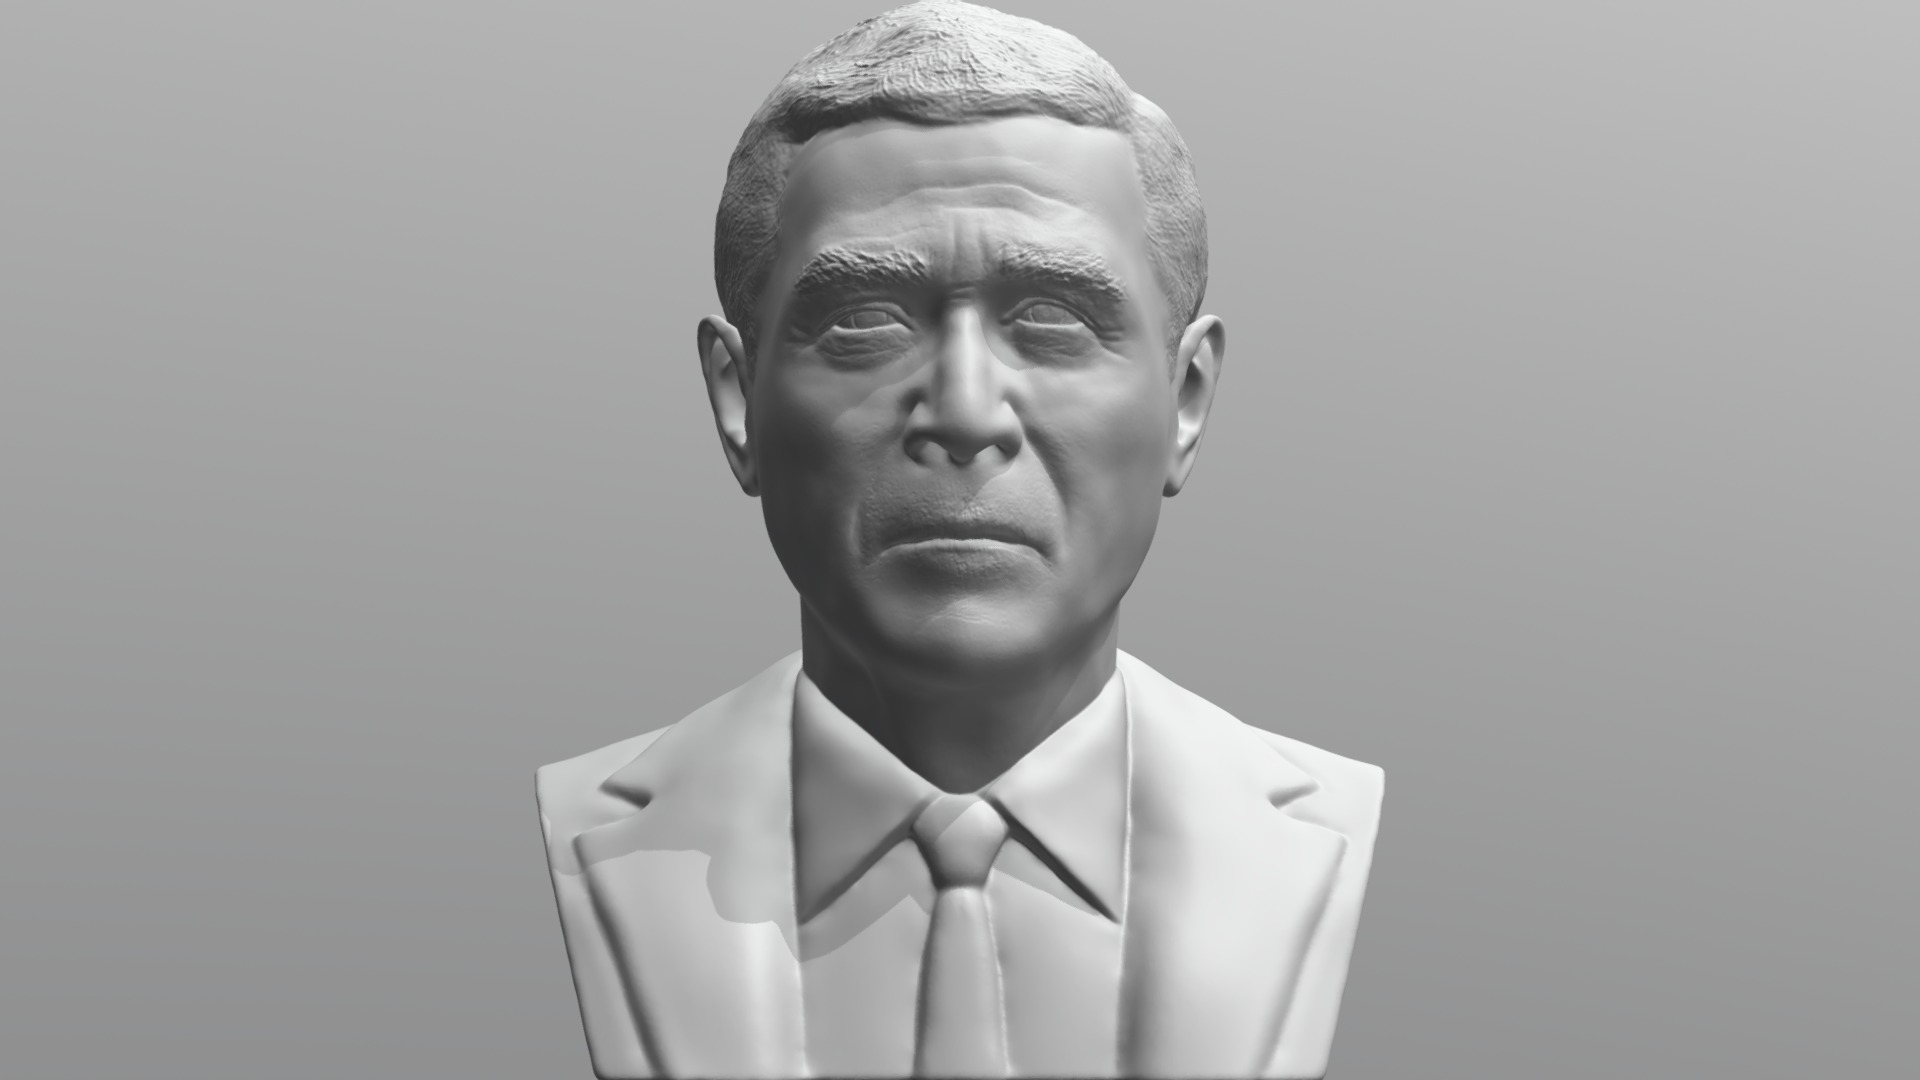 3D model George Bush bust for 3D printing - This is a 3D model of the George Bush bust for 3D printing. The 3D model is about a man in a suit.